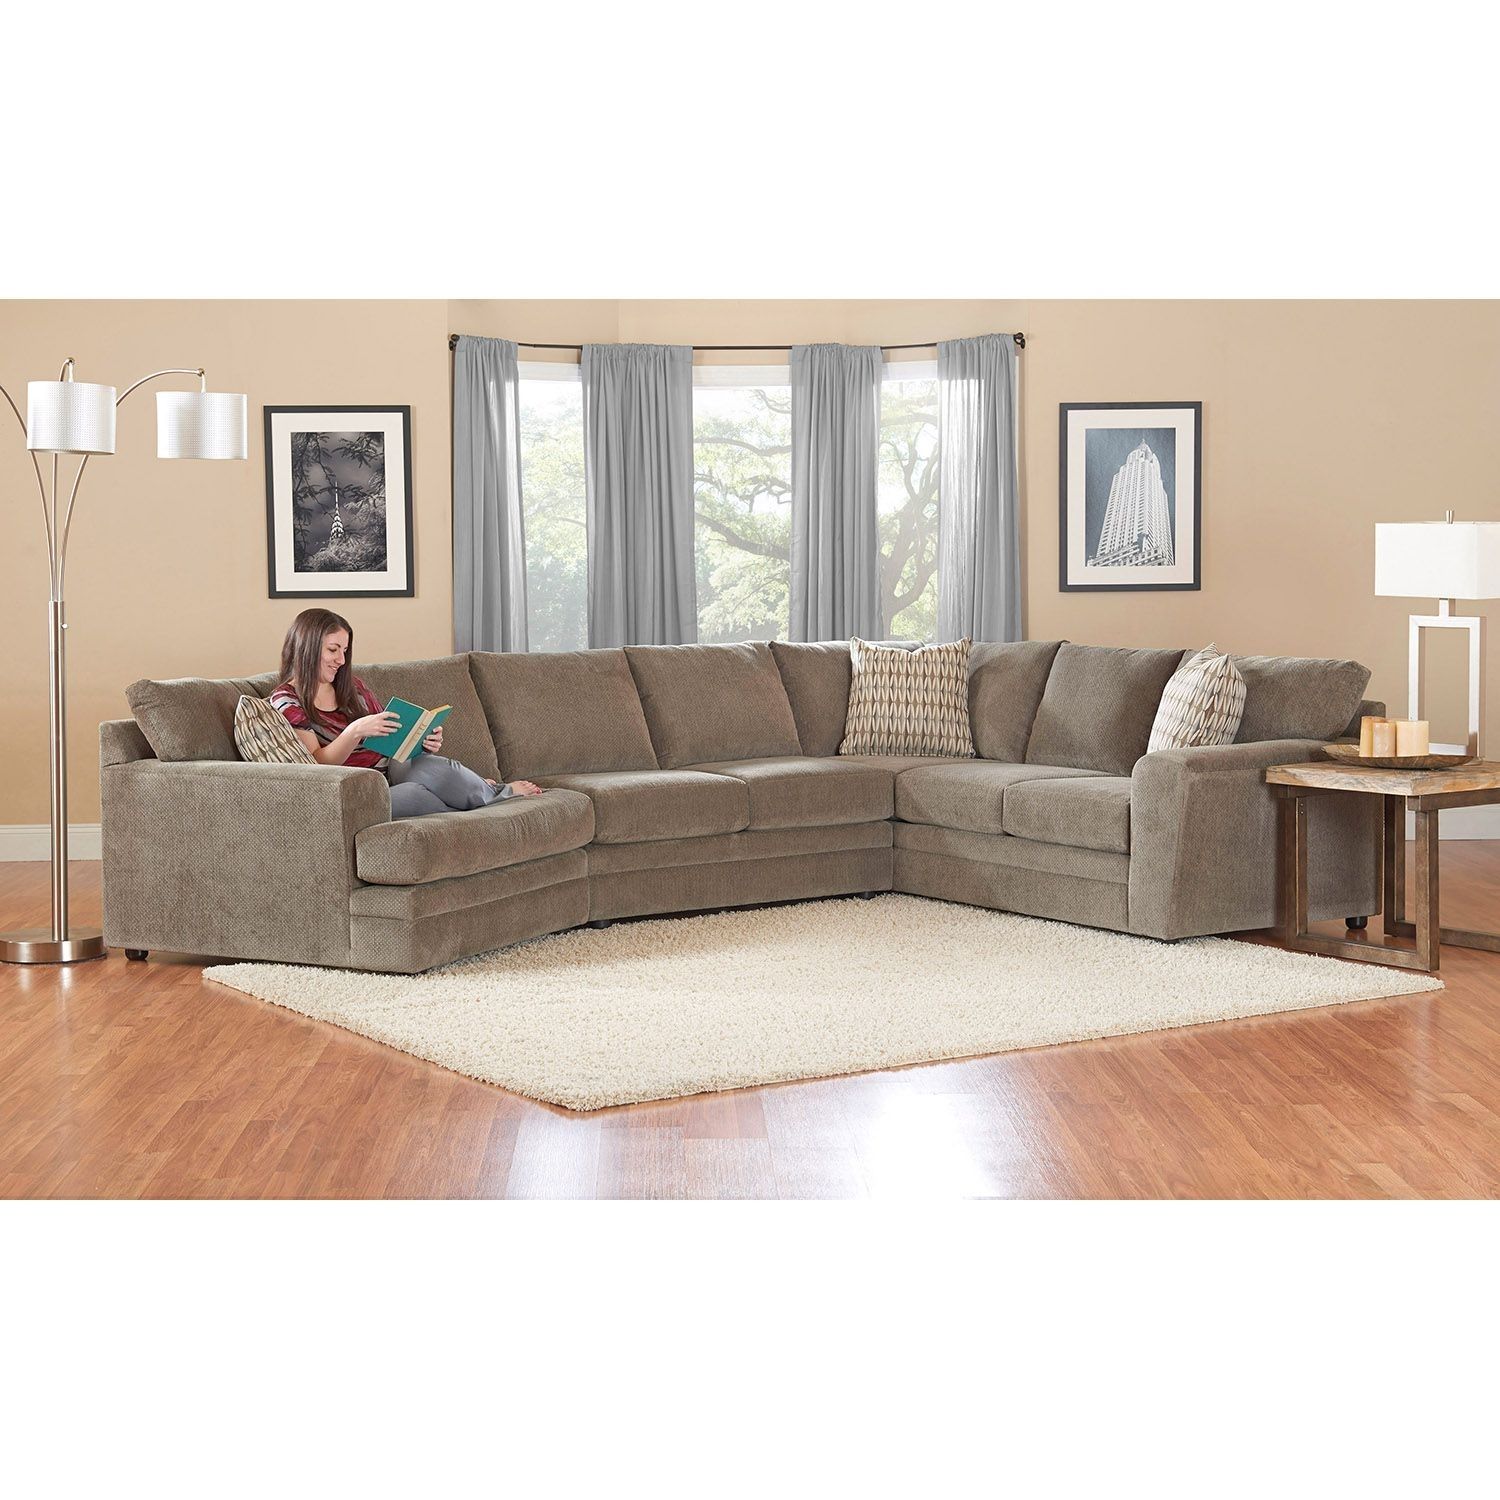 Prestige Ashburn Sectional Sofa – Sam's Club Gray Couch | Home With Regard To Sectional Sofas At Sam's Club (View 1 of 10)